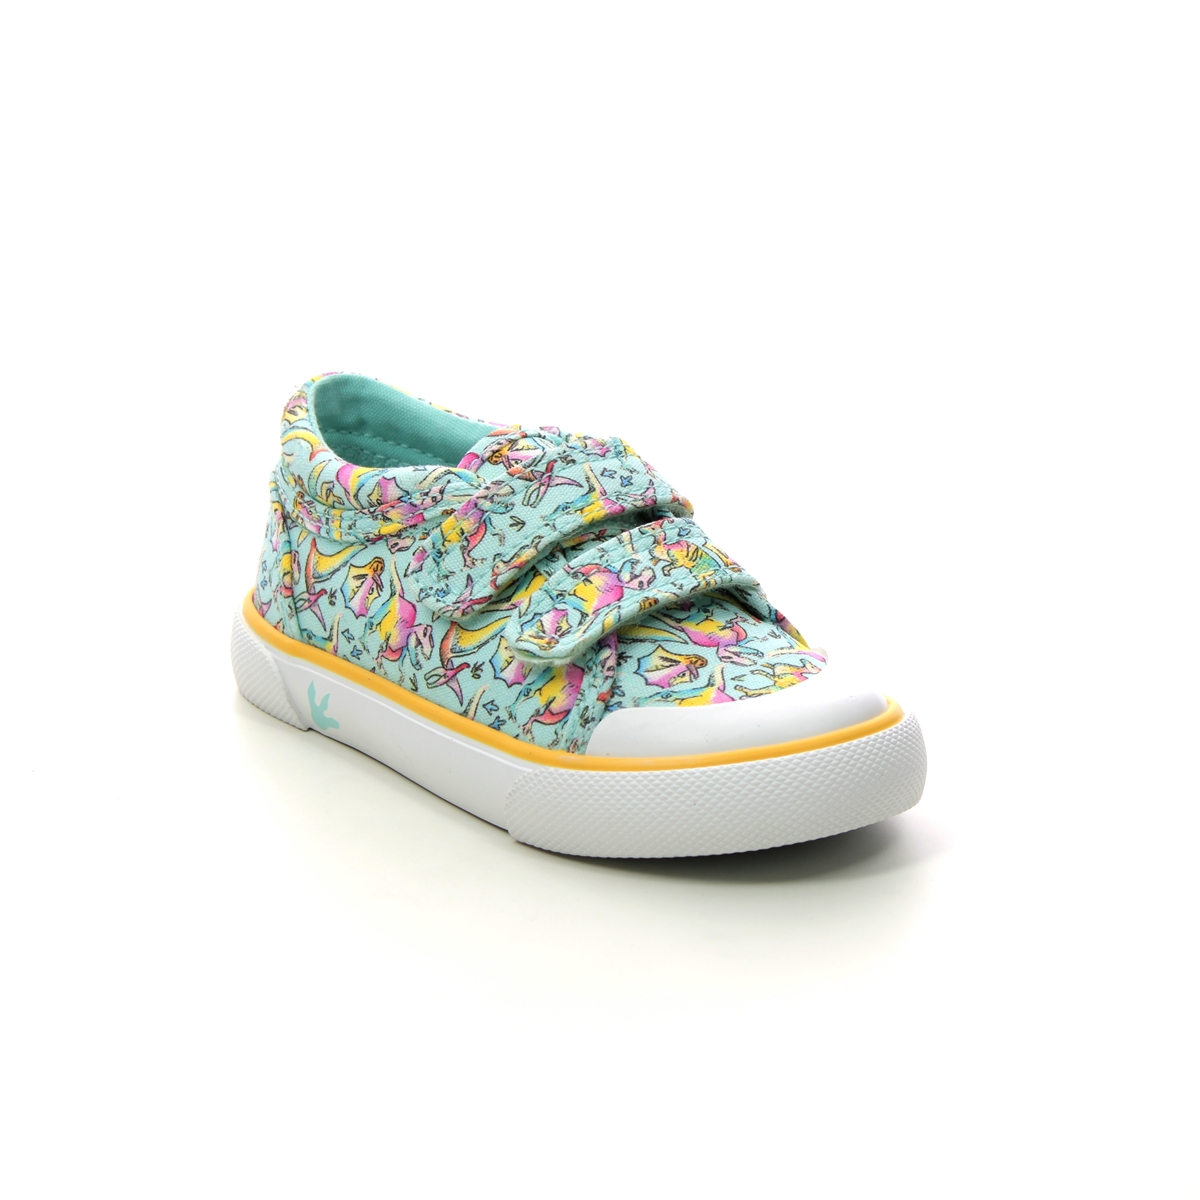 Start Rite Dino Mite Canvas Blue multi Kids toddler girls trainers 6192-56F in a Plain Canvas in Size 4.5